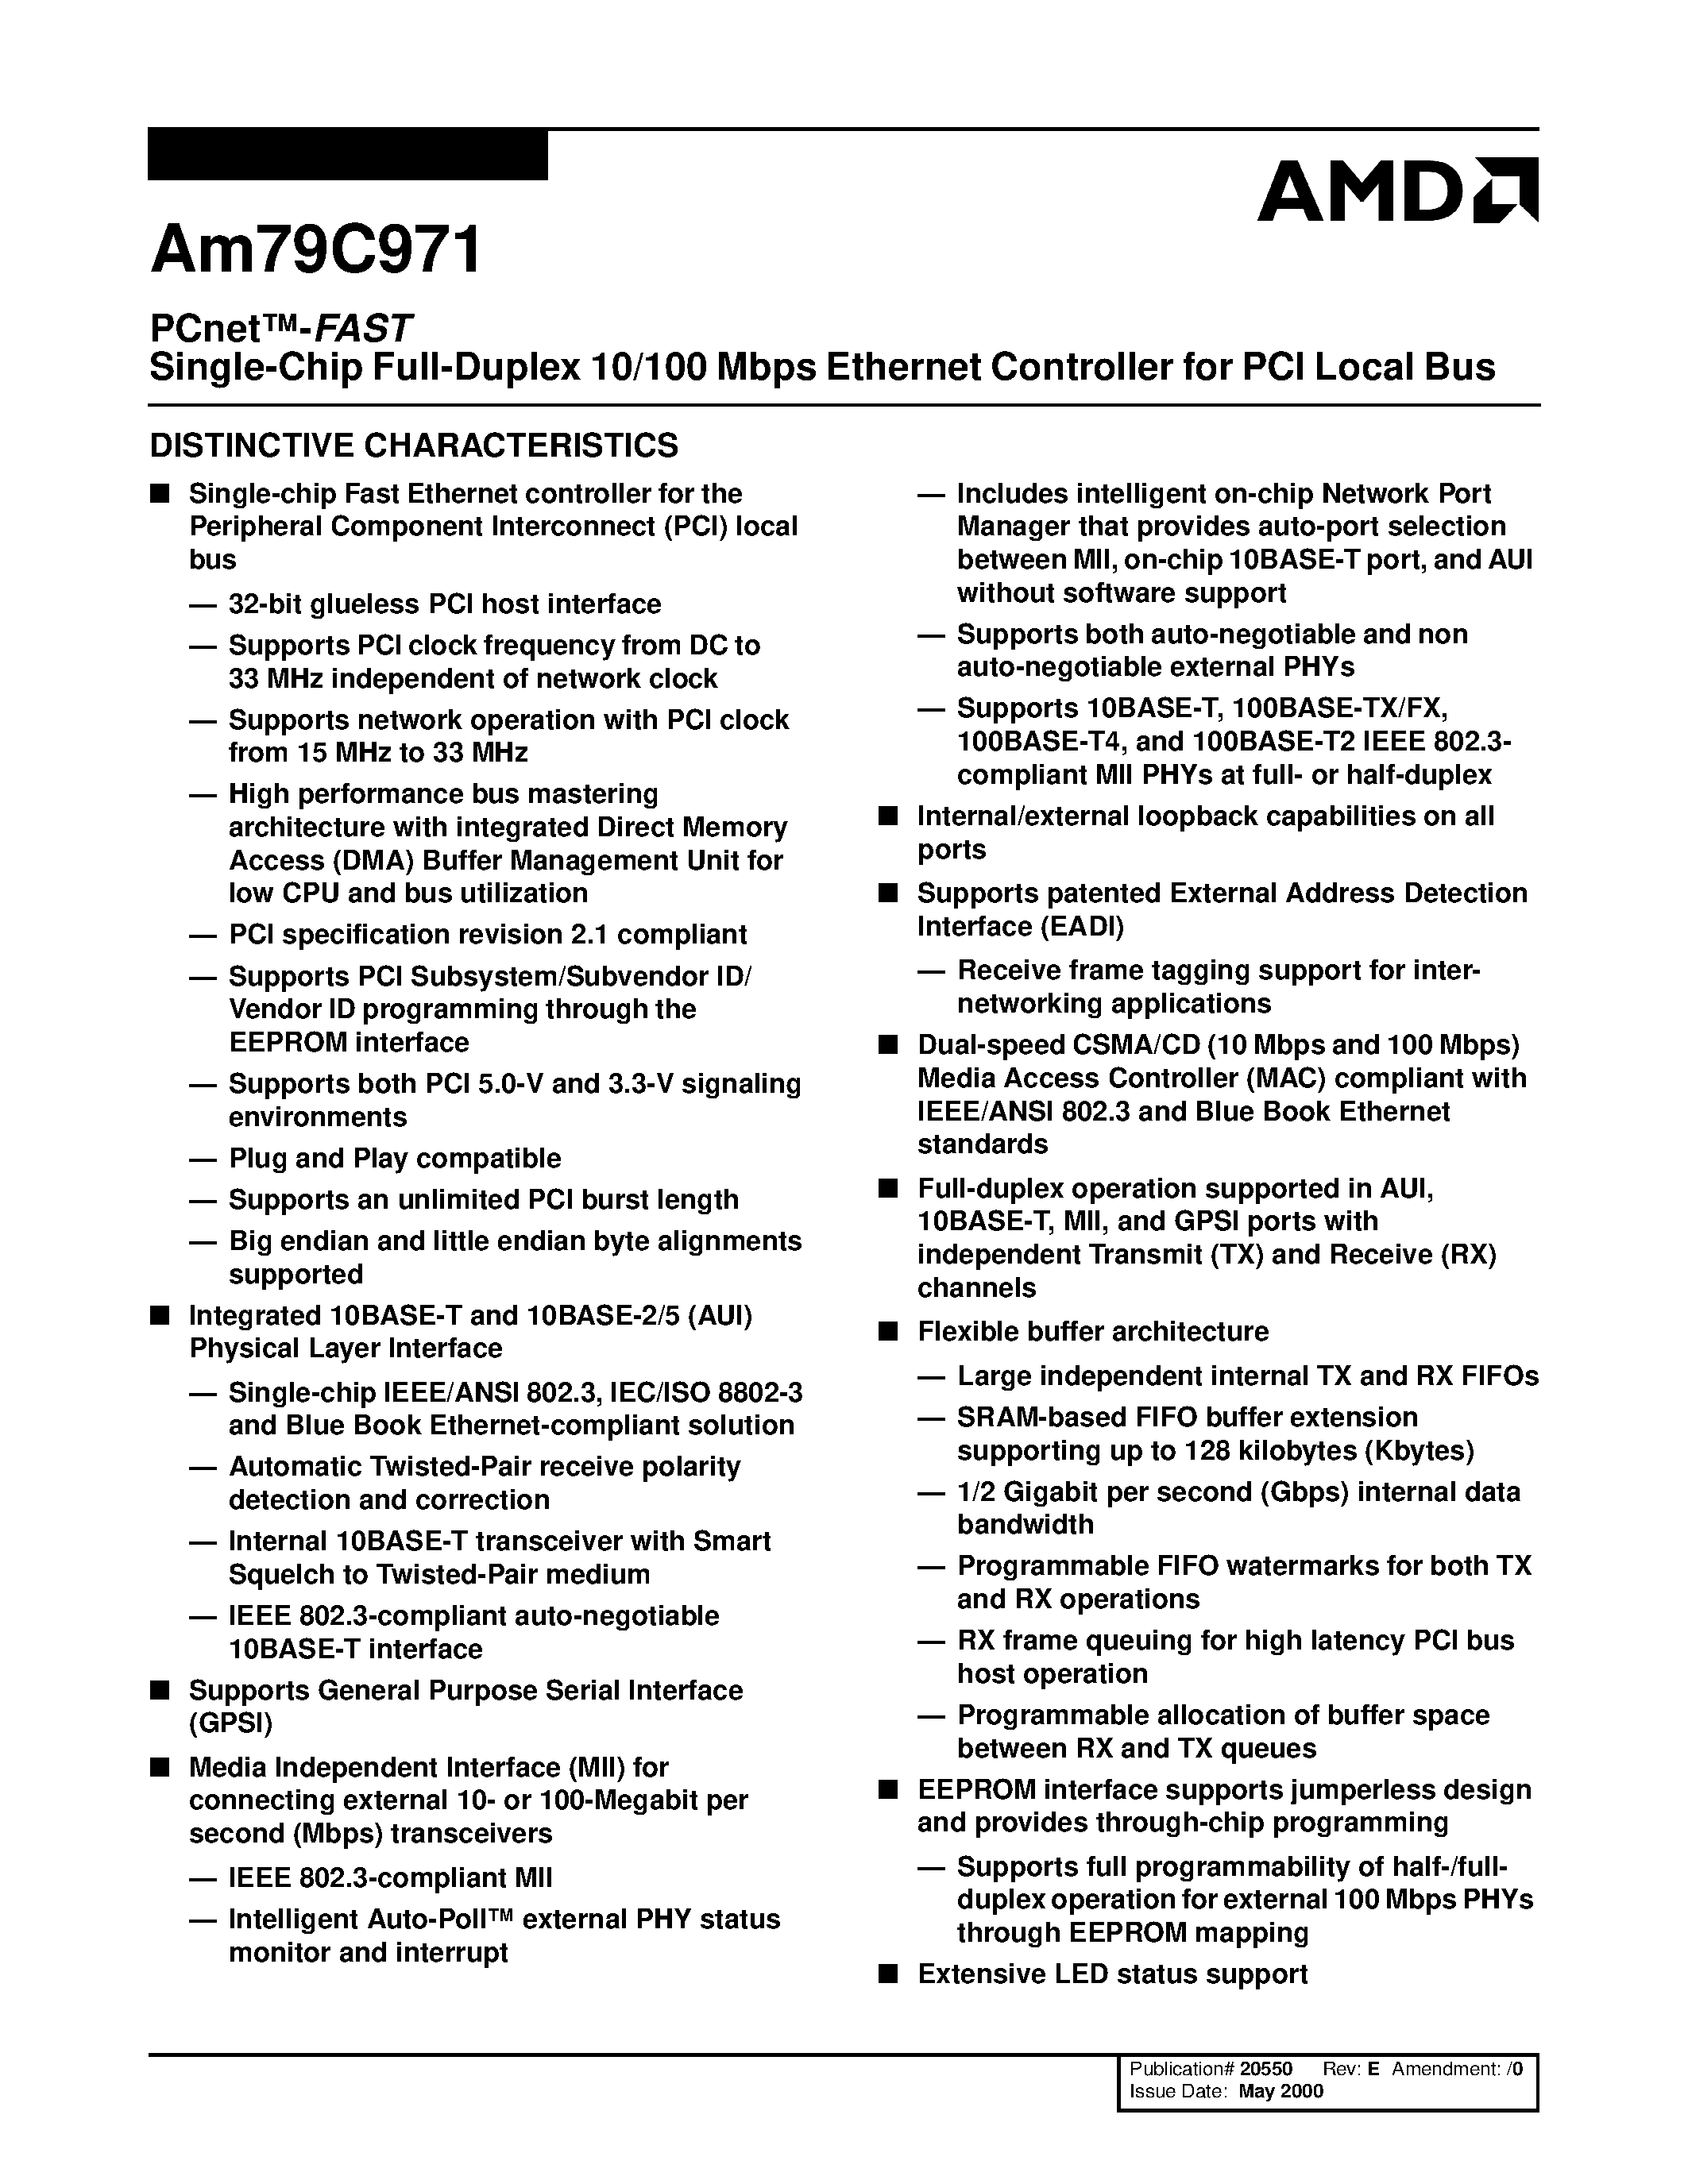 Datasheet Am79C971KCW - PCnet-FAST Single-Chip Full-Duplex 10/100 Mbps Ethernet Controller for PCI Local Bus page 1